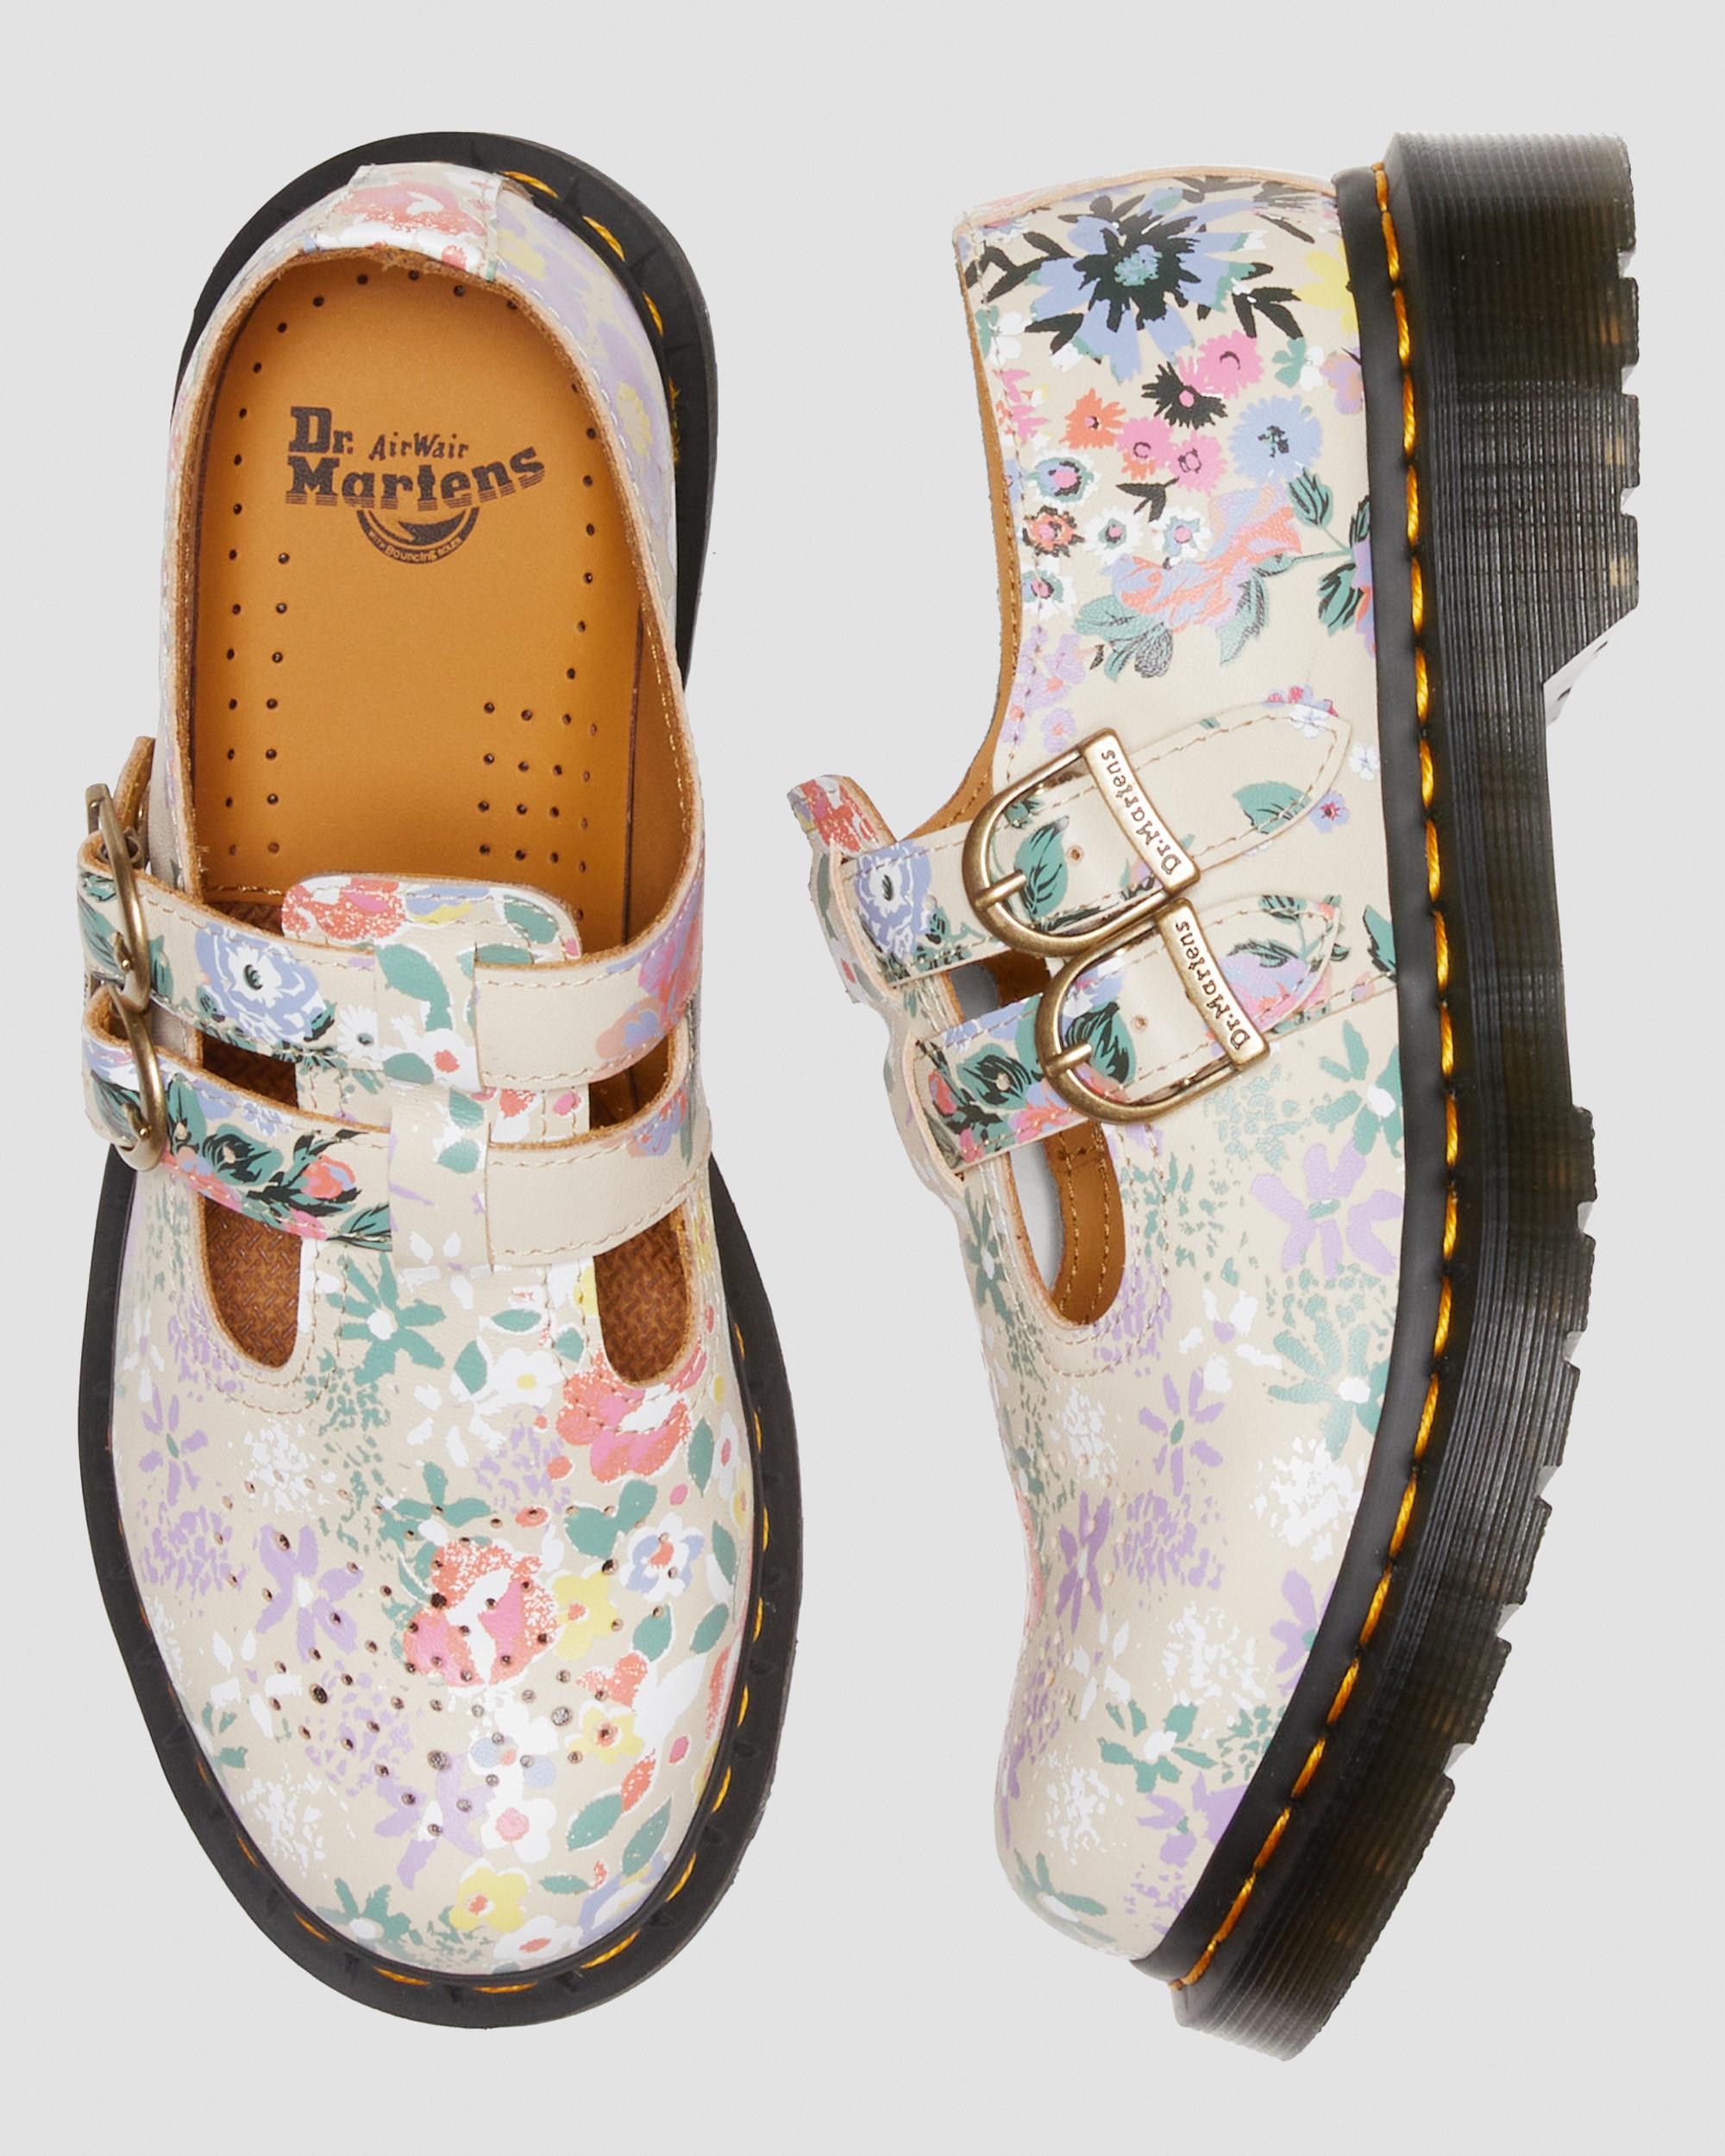 Mary Up Shoes Leather Dr. Martens Jane Floral | Beige in Parchment Mash 8065